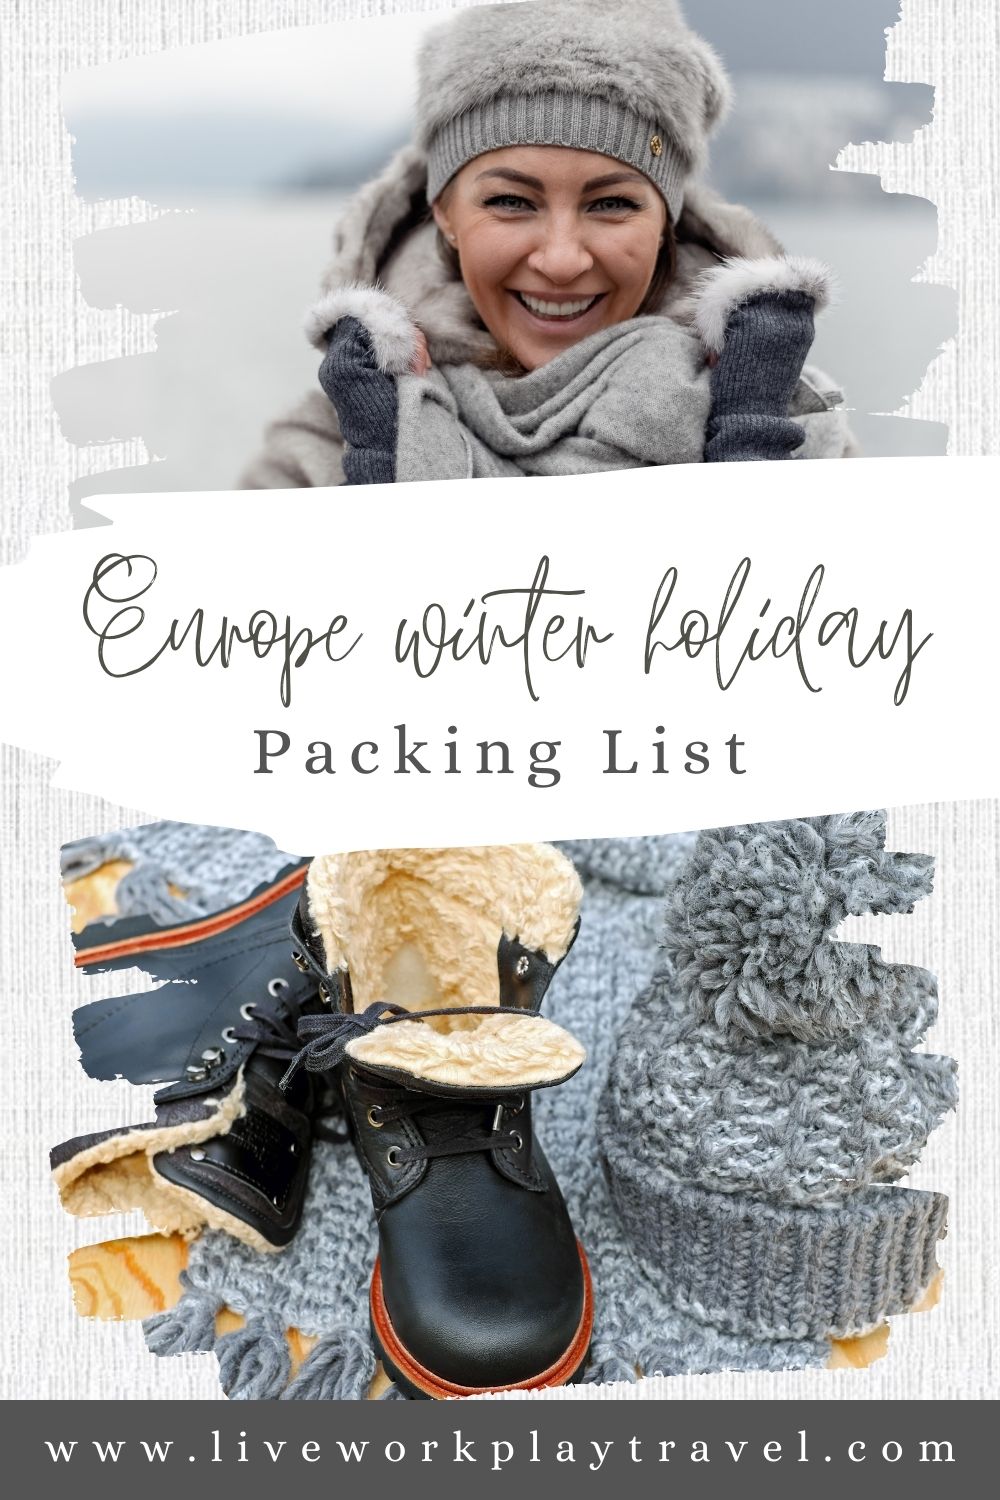 What to pack for a winter city break: Winter carry on packing list